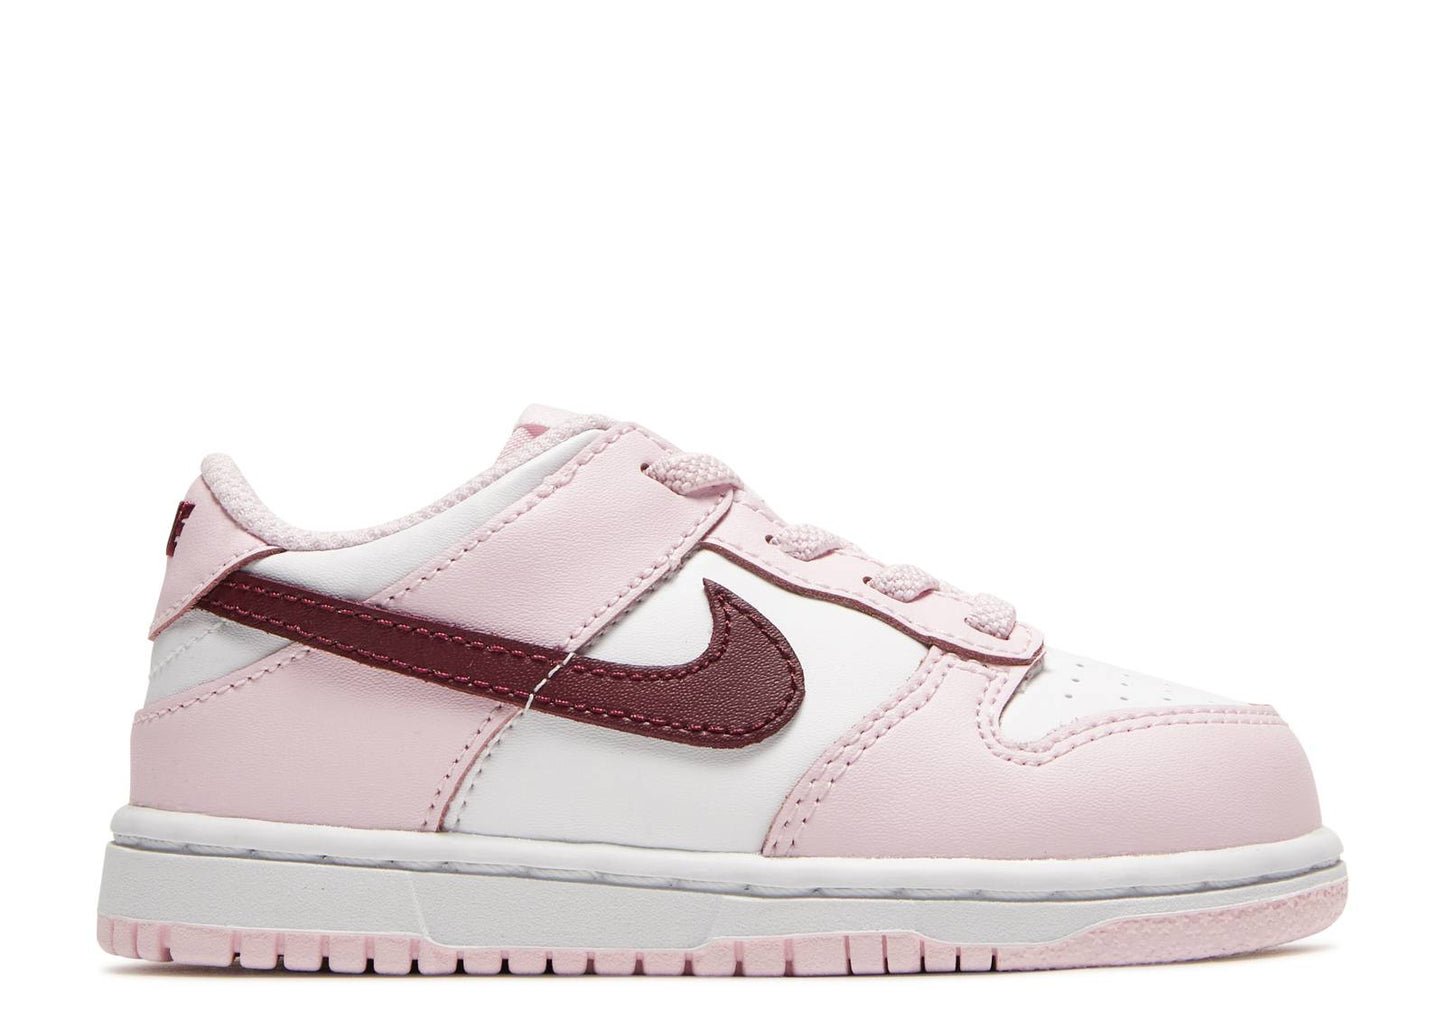 DUNK LOW PS 'VALENTINE'S DAY'